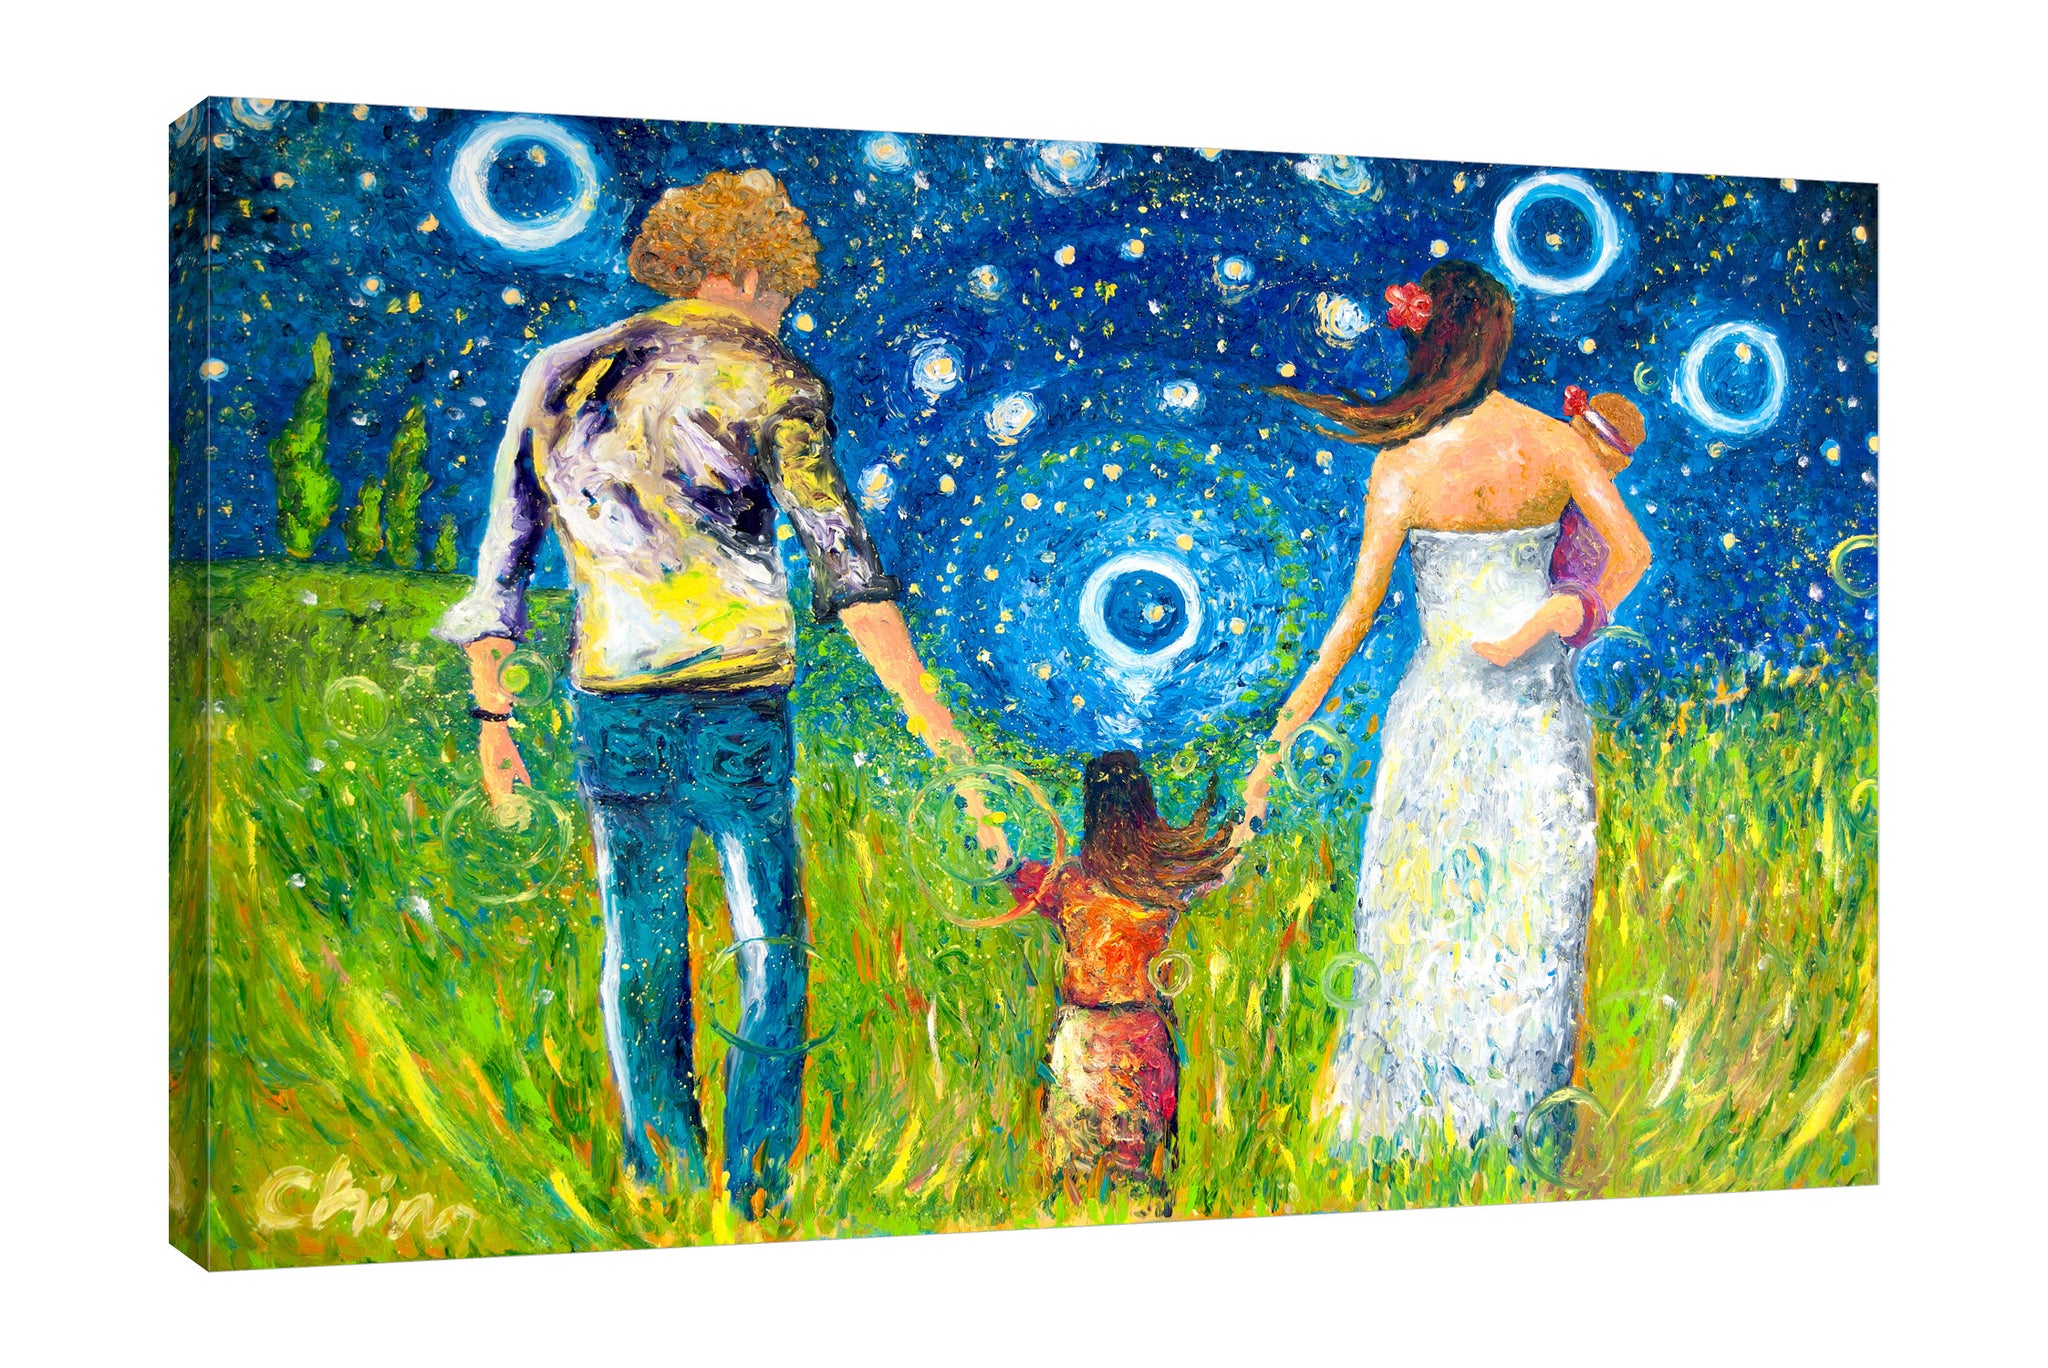 Chiara-Magni,Modern & Contemporary,People,Landscape & Nature,Finger-paint,family,mother,father,daughter,people,night,stars,circles,grass,trees,scenery,landscape,